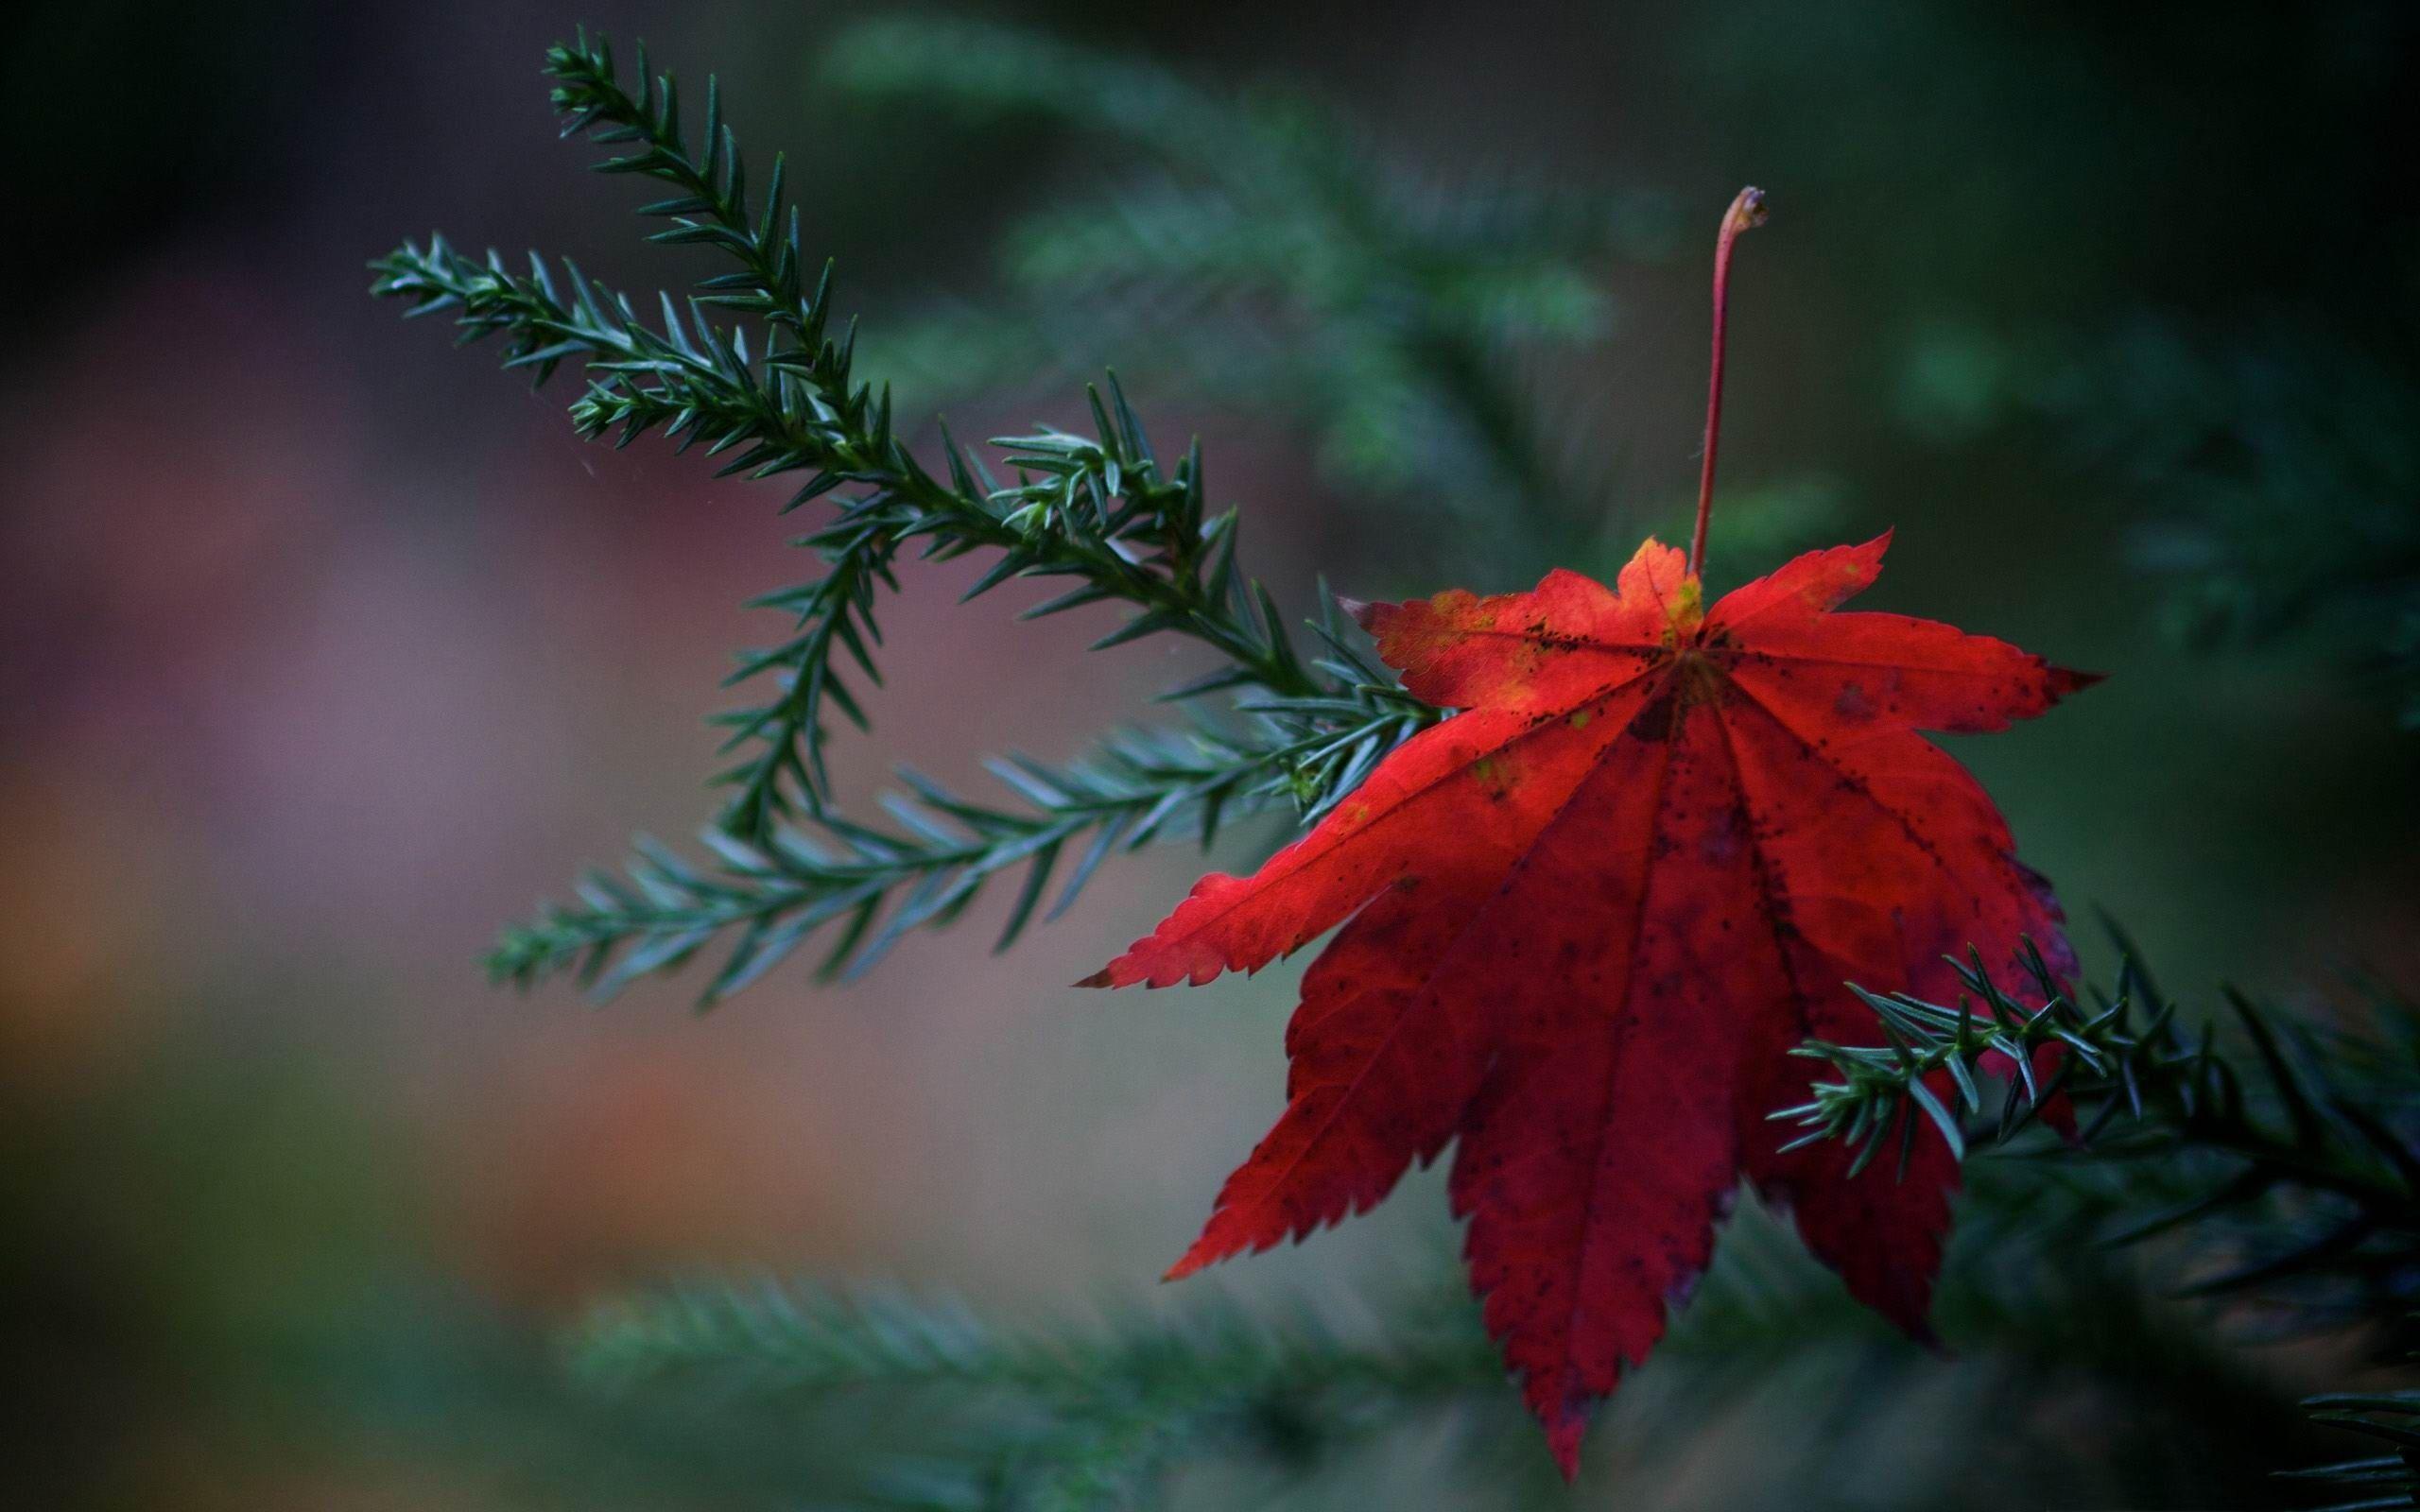 Red Fallen Leaf Autumn Nature. HQ Wallpaper for PC